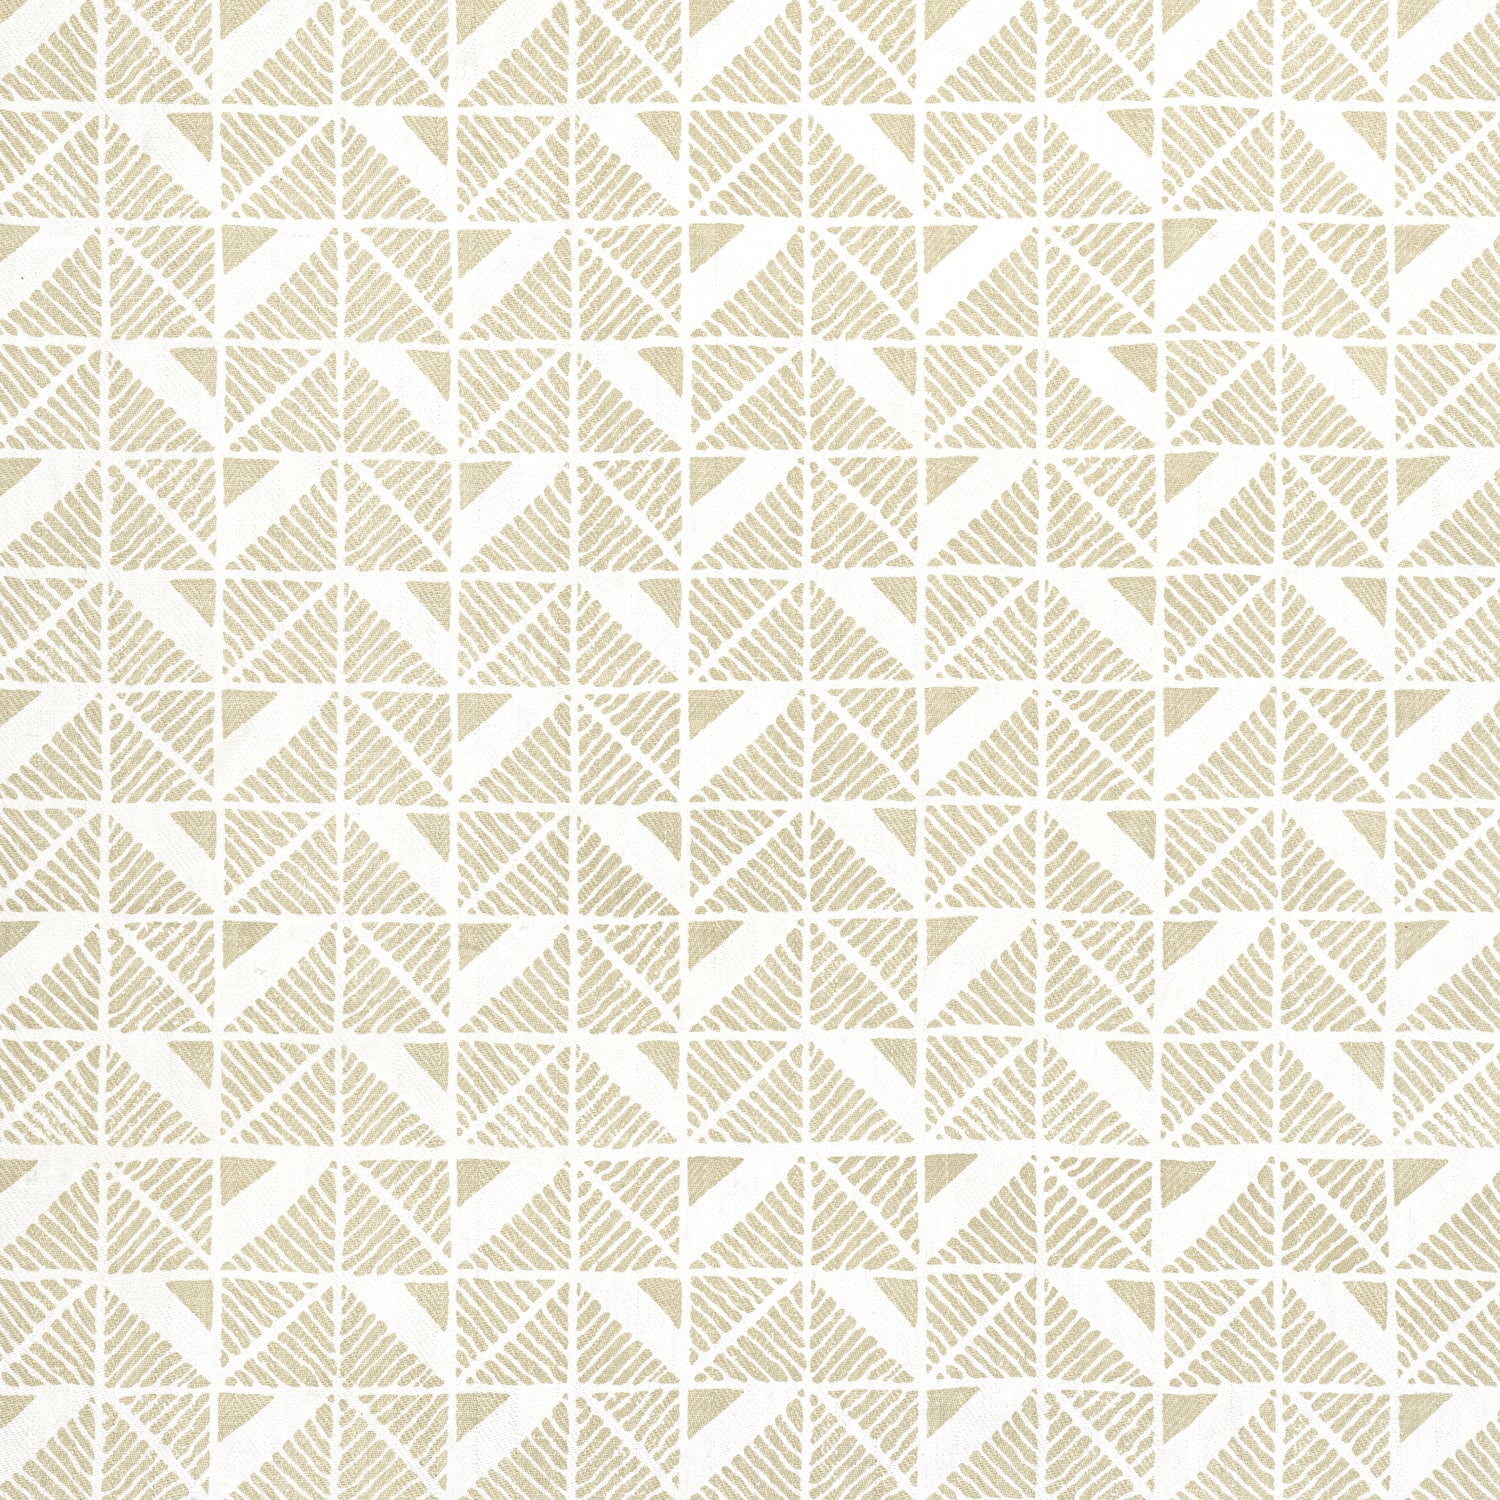 Bloomsbury Square fabric in beige color - pattern number AF23112 - by Anna French in the Willow Tree collection